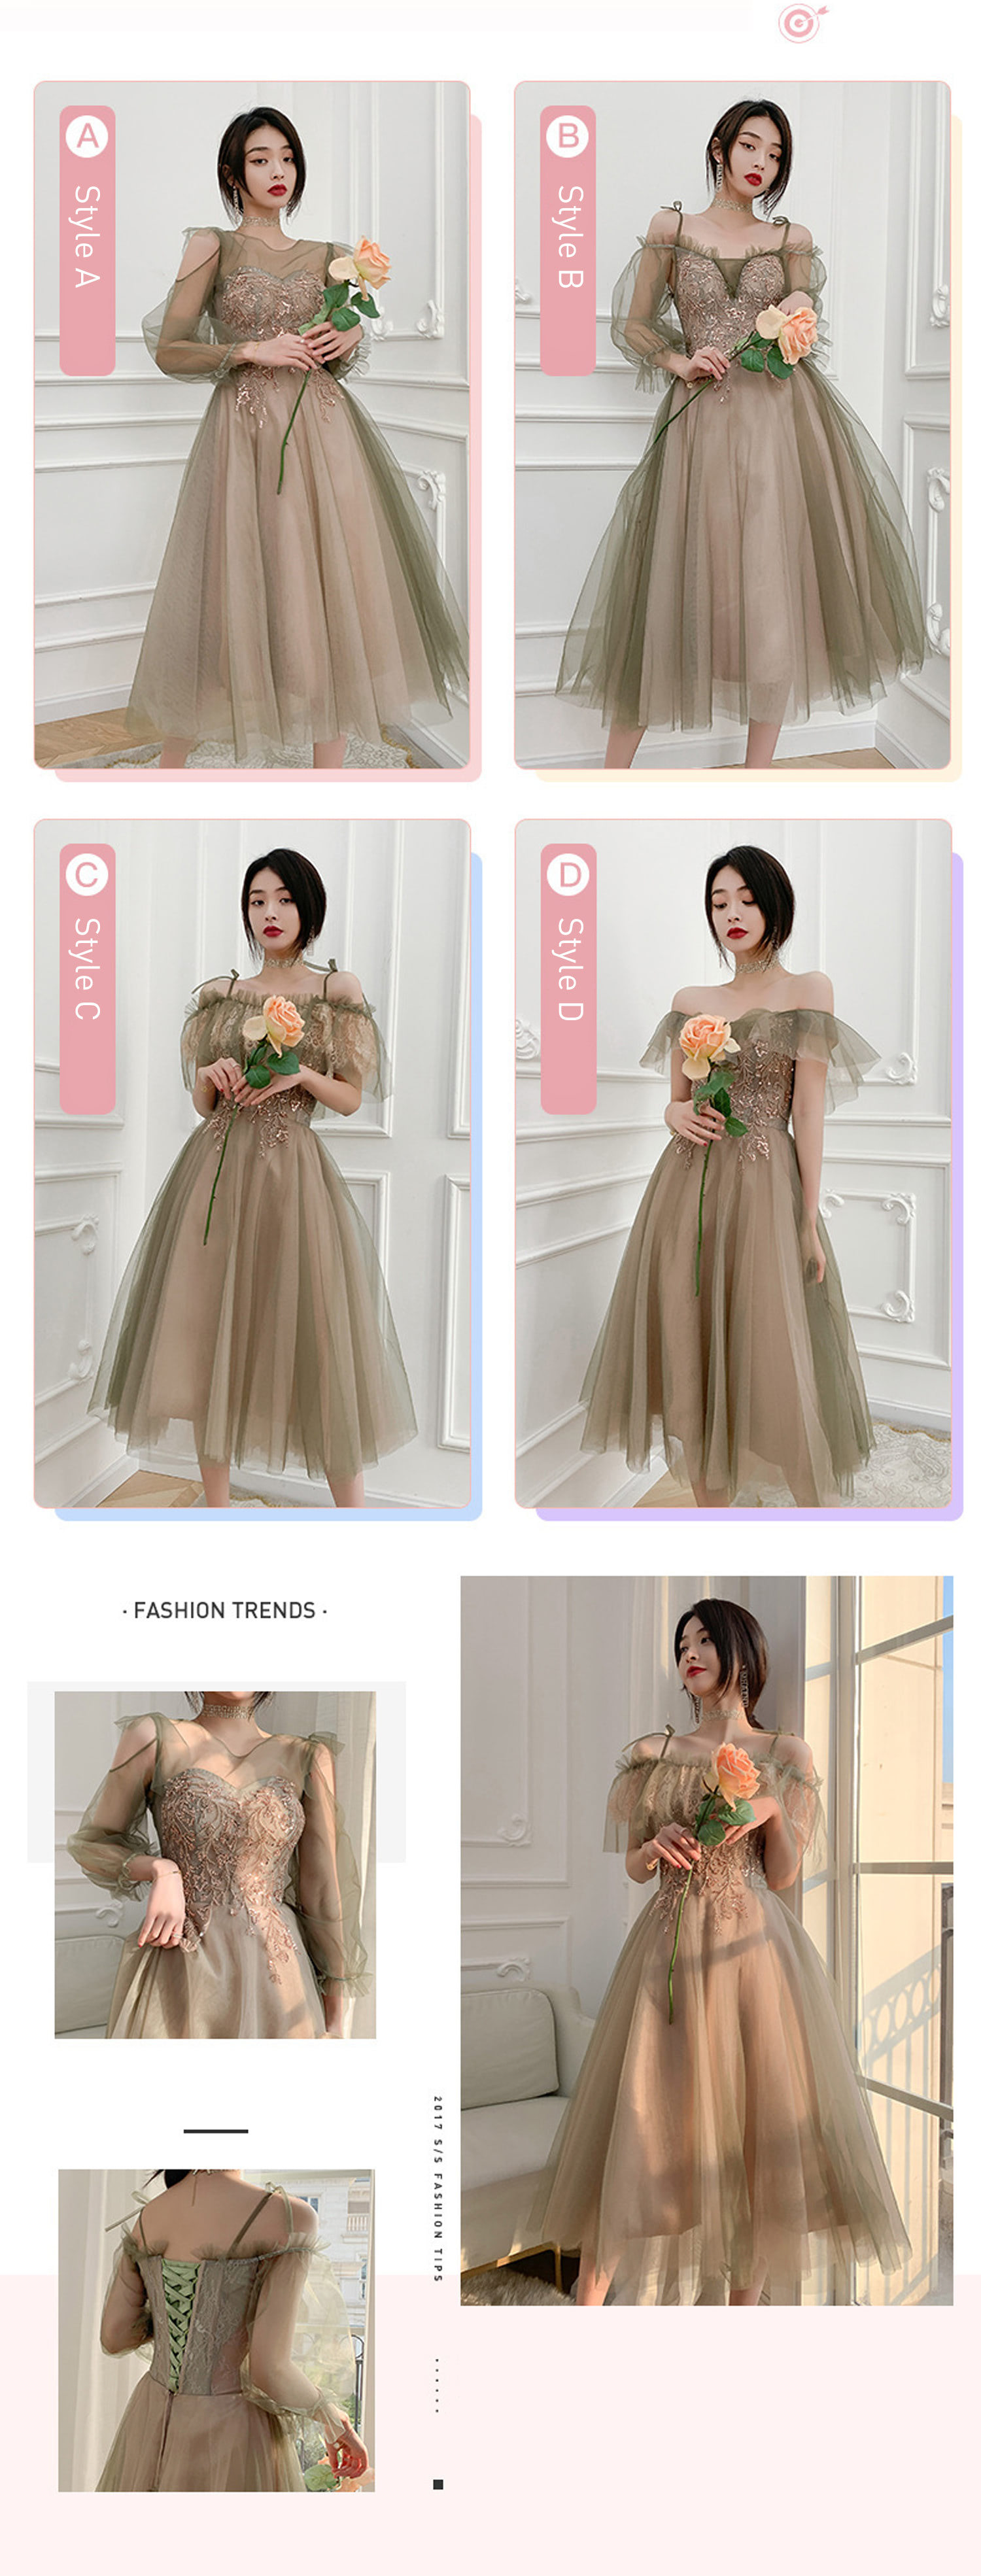 Avocado-Green-Mid-Length-Dress-for-Cocktail-Wedding-Bridesmaid-Party12